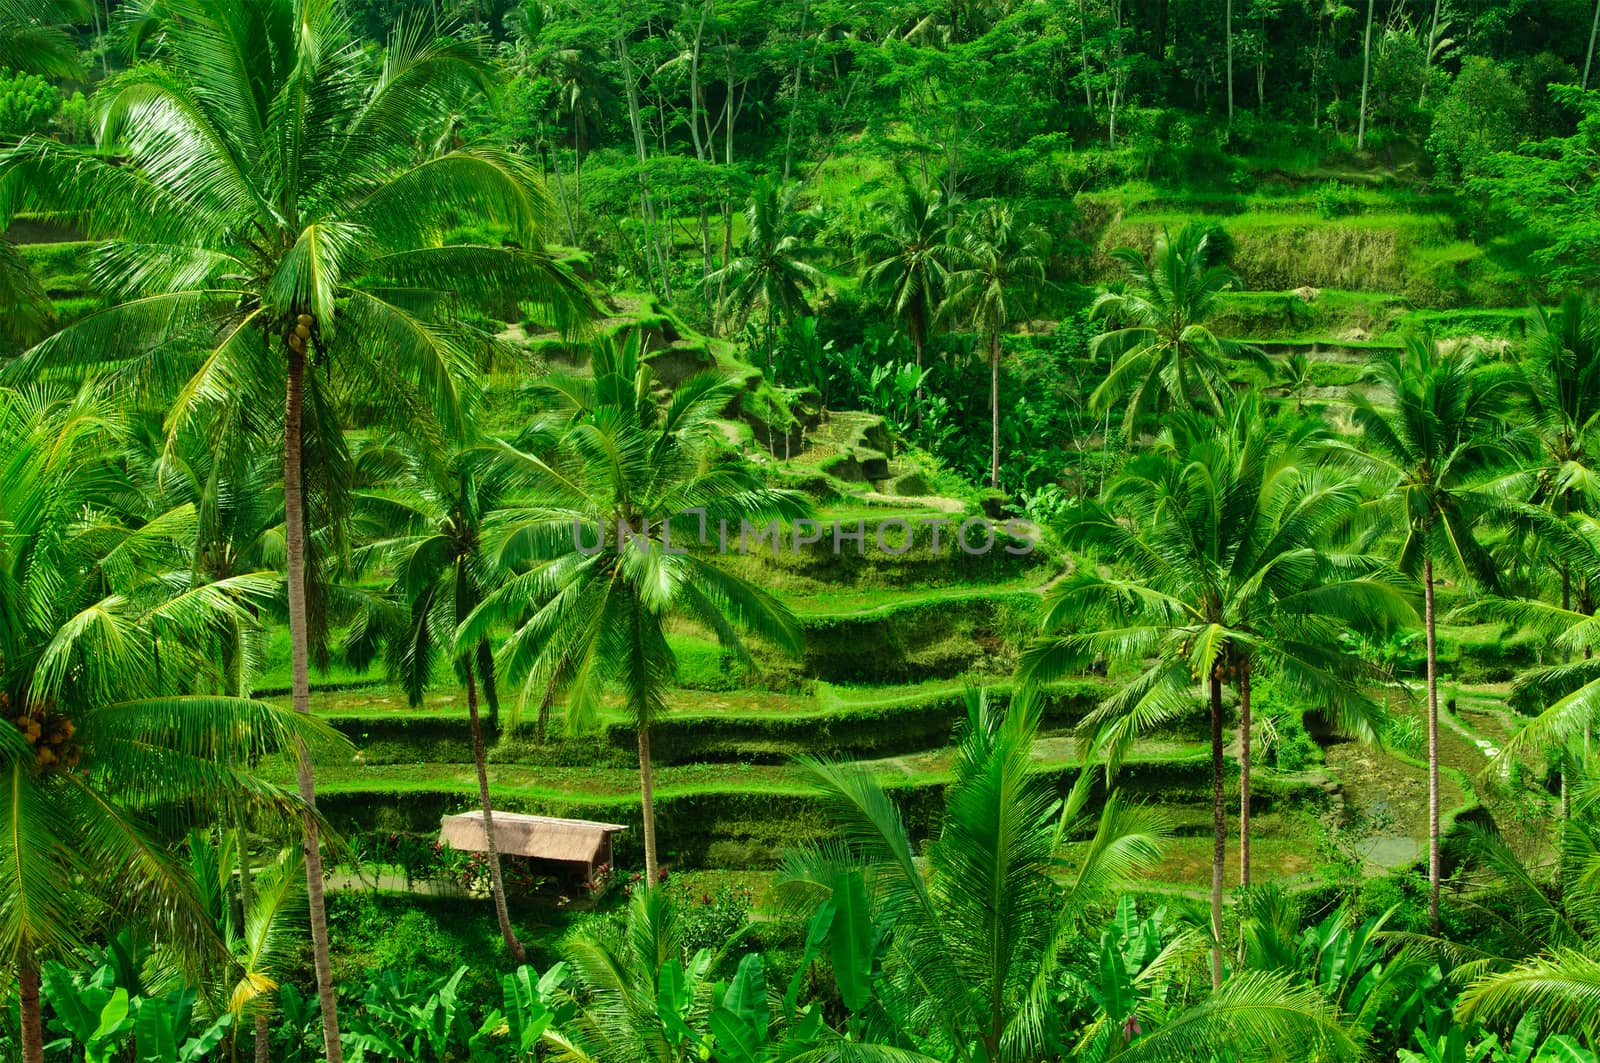 Terrace rice fields on Bali, Indonesia by johnnychaos